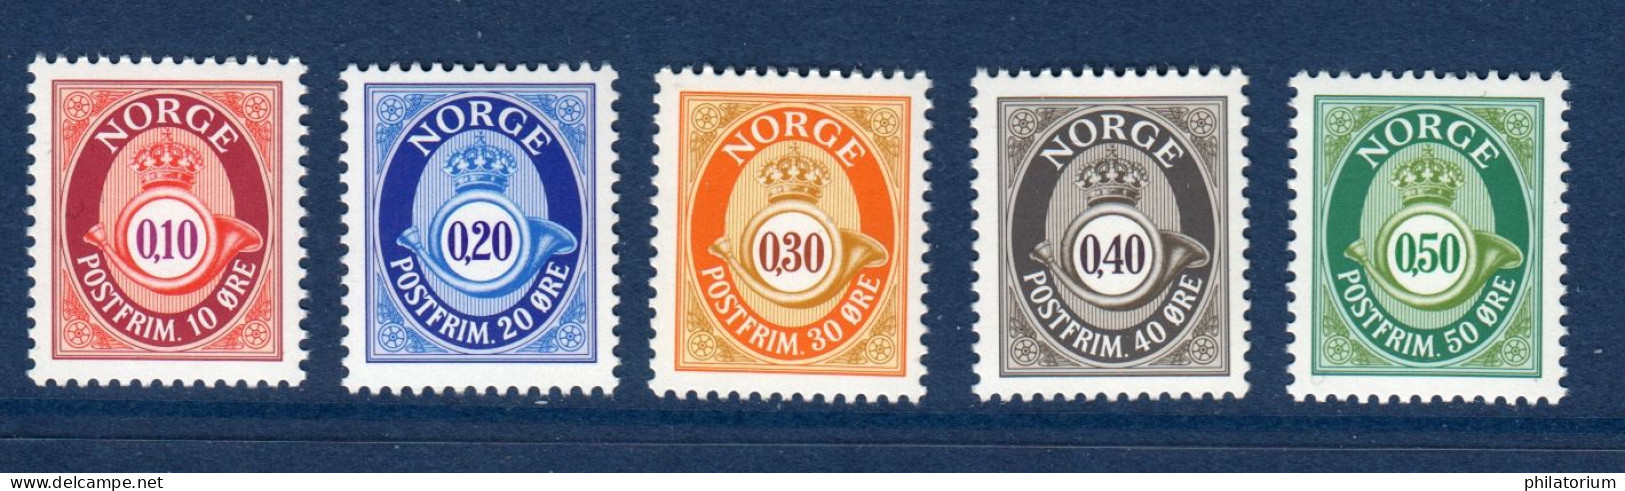 Norge, Norvège, **, Yv 1194, 1195, 1196, 1197, 1198, Mi 1237, 1238, 1239, 1240, 1241 A, SG 1252, 1253, 1254, 1255, 1256, - Unused Stamps